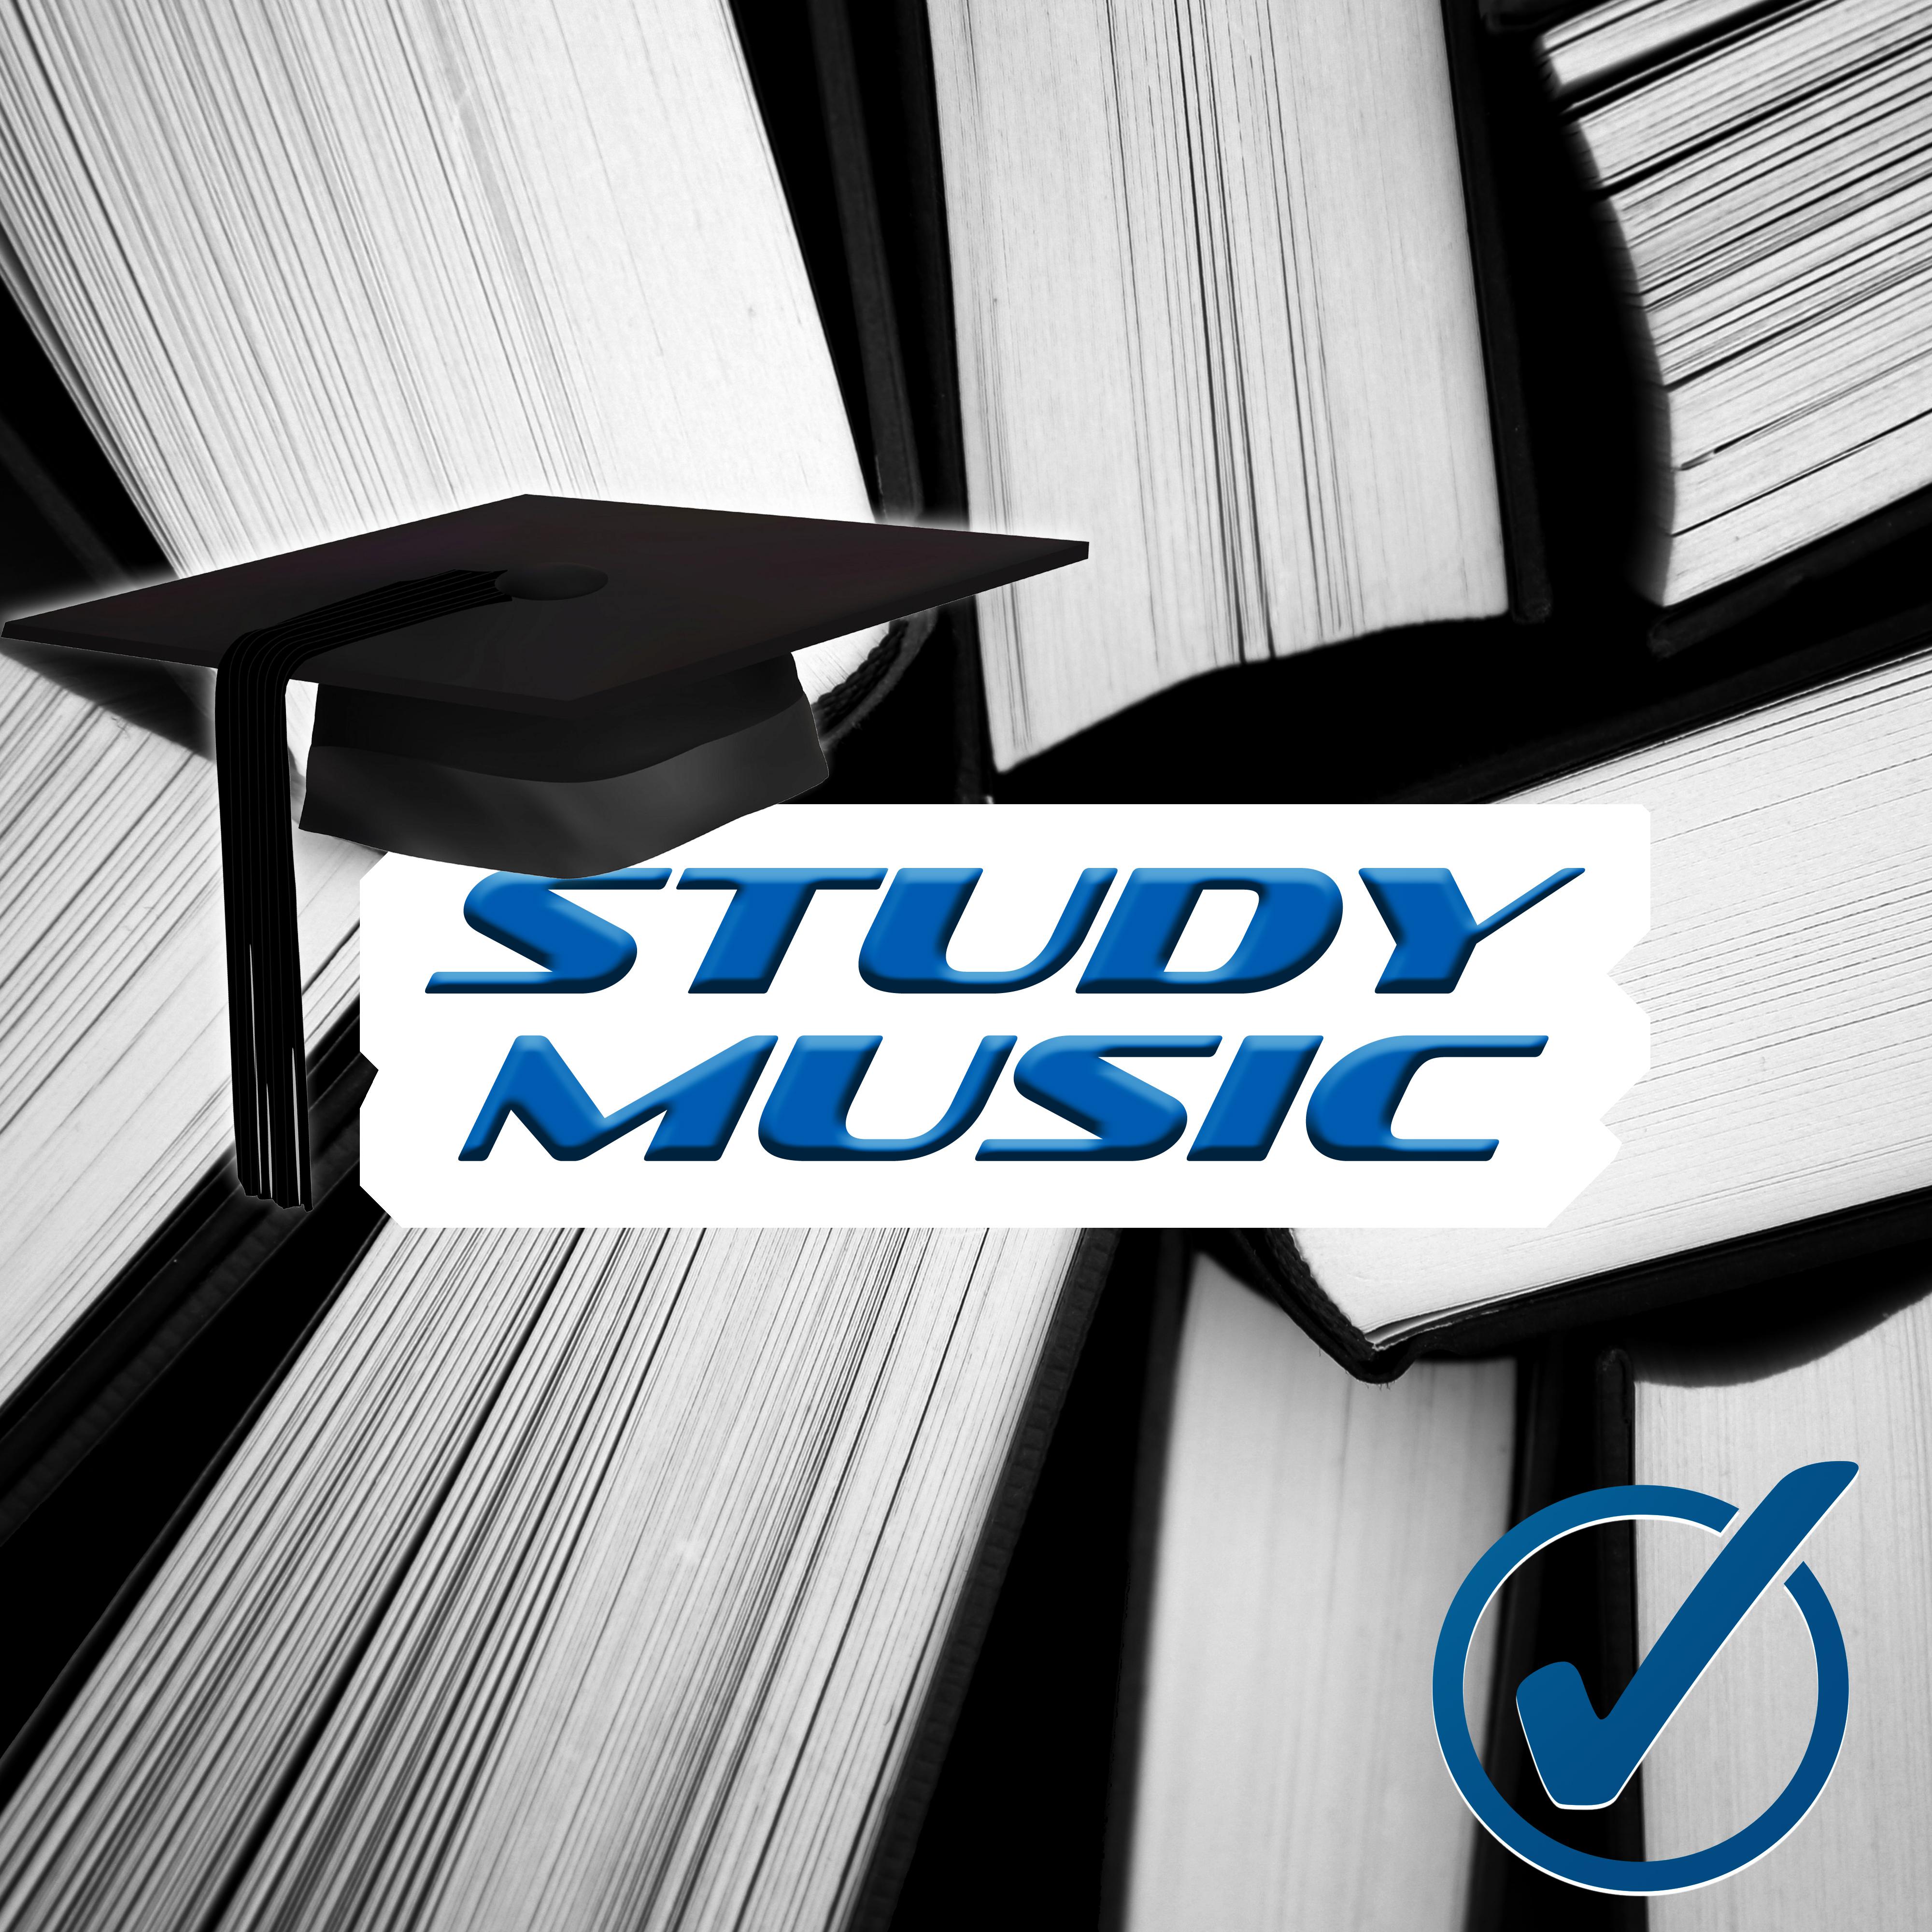 Ambient Study Music  Calm Background Music to Improve Concentration  Memory, Do Homework, Nature Sounds for Brain Power, Active Listening, Relax and Study Easily